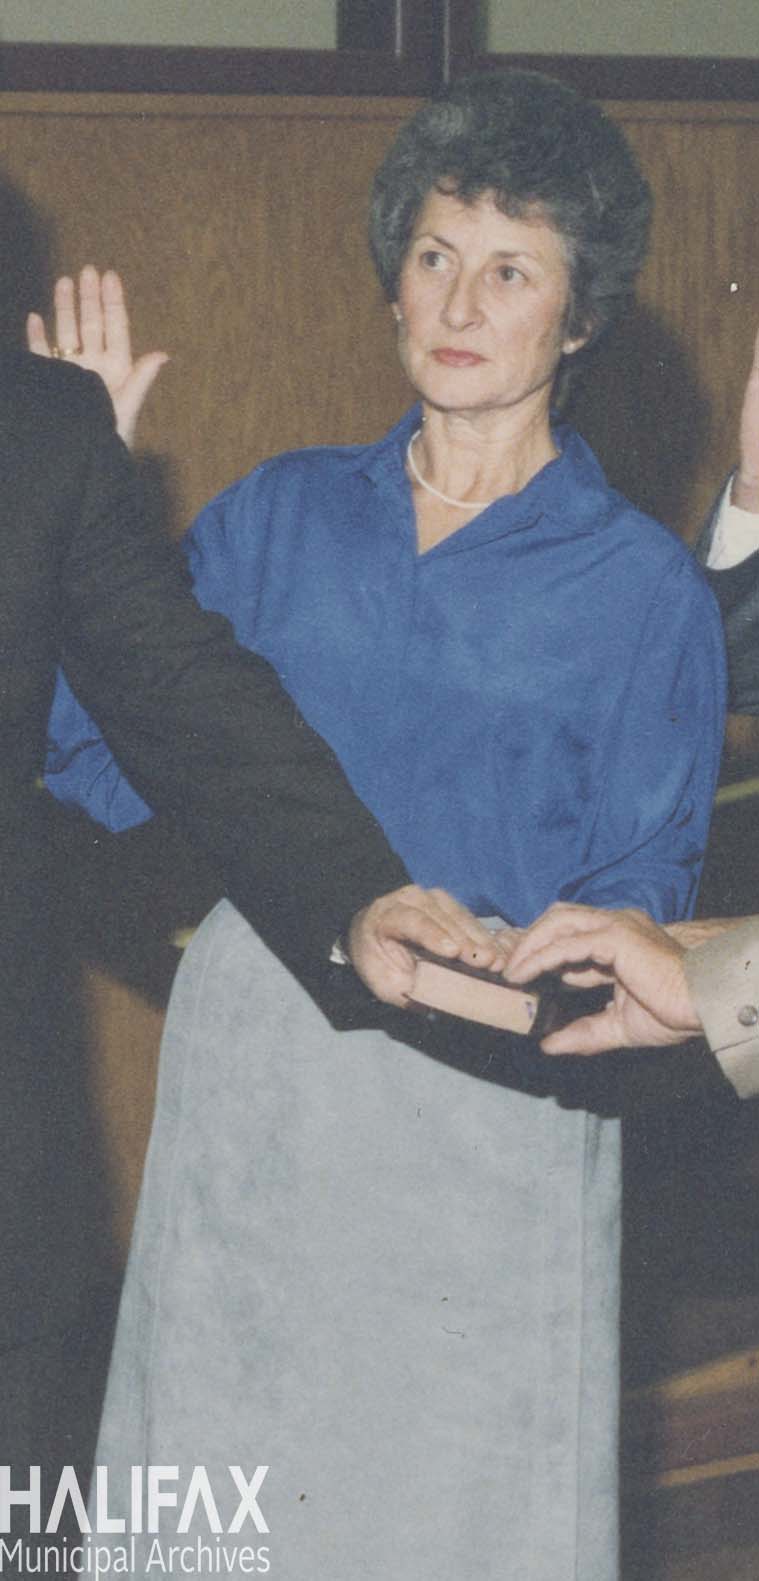 Colour photograph of a dark haired woman wearing a blue blouse and grey skirt with her right hand raised and left hand on a bible